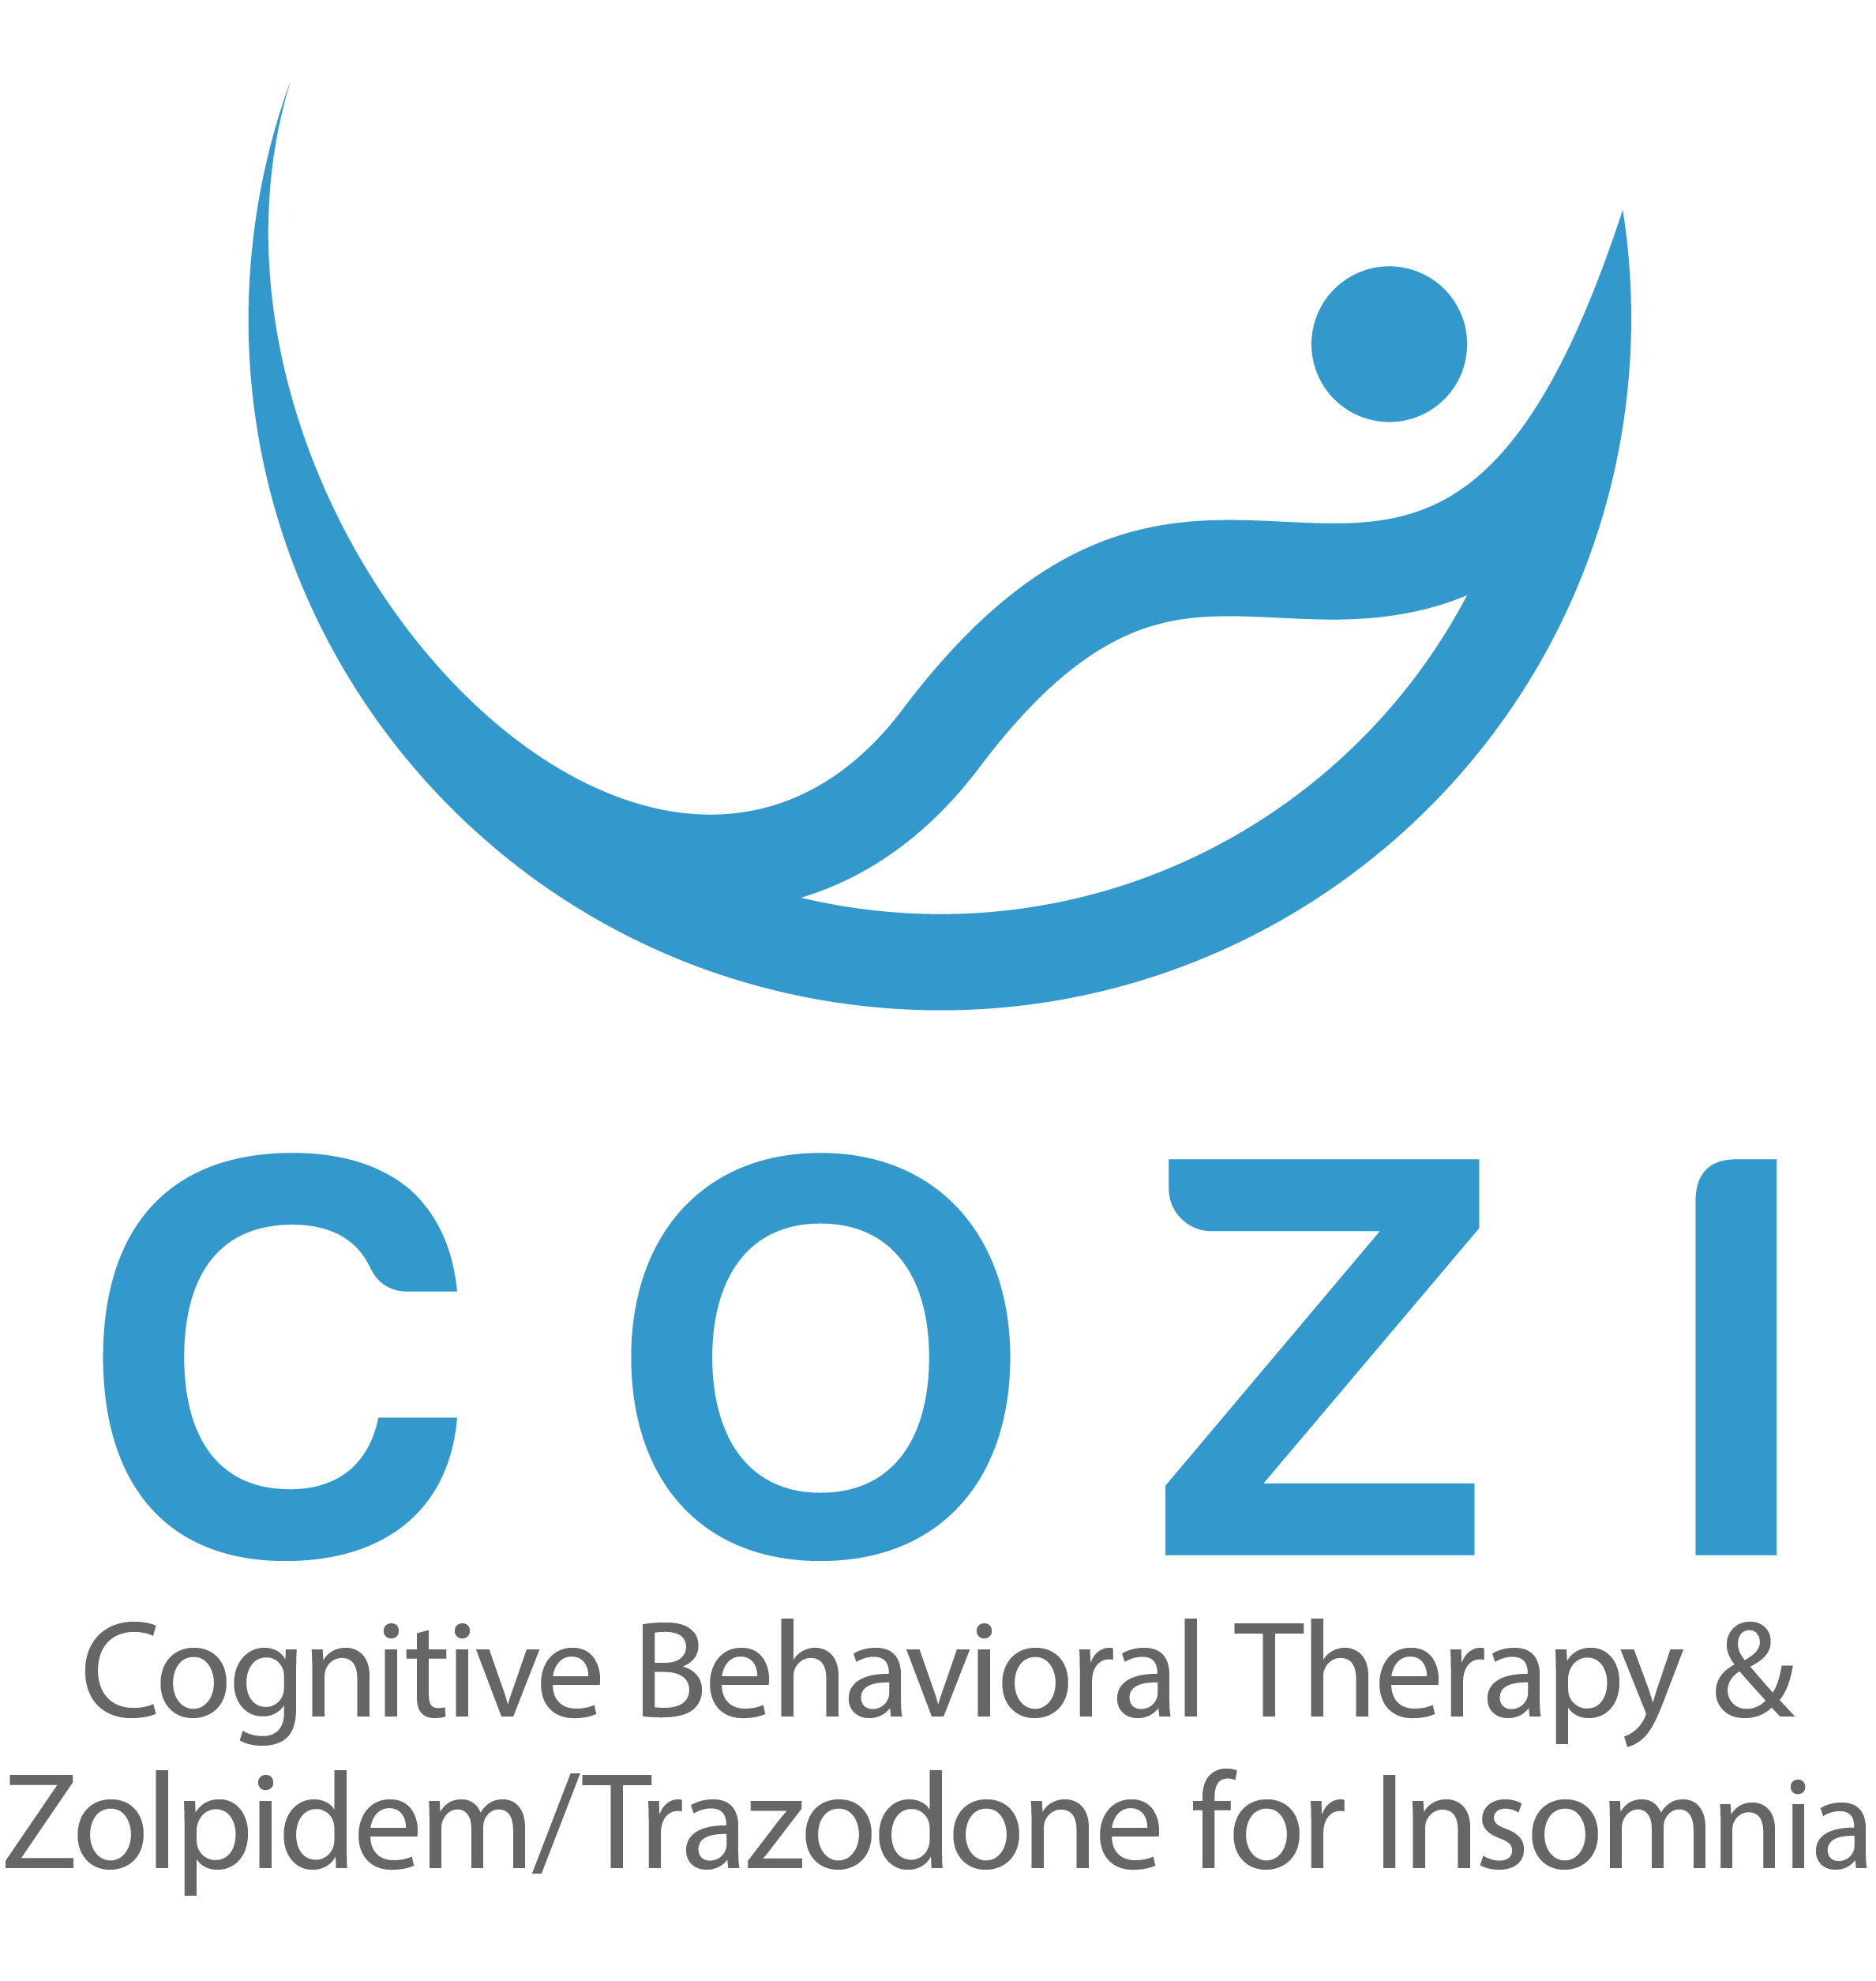 Cognitive Behavioral Therapy and Zolpidem/Trazodone for Insomnia